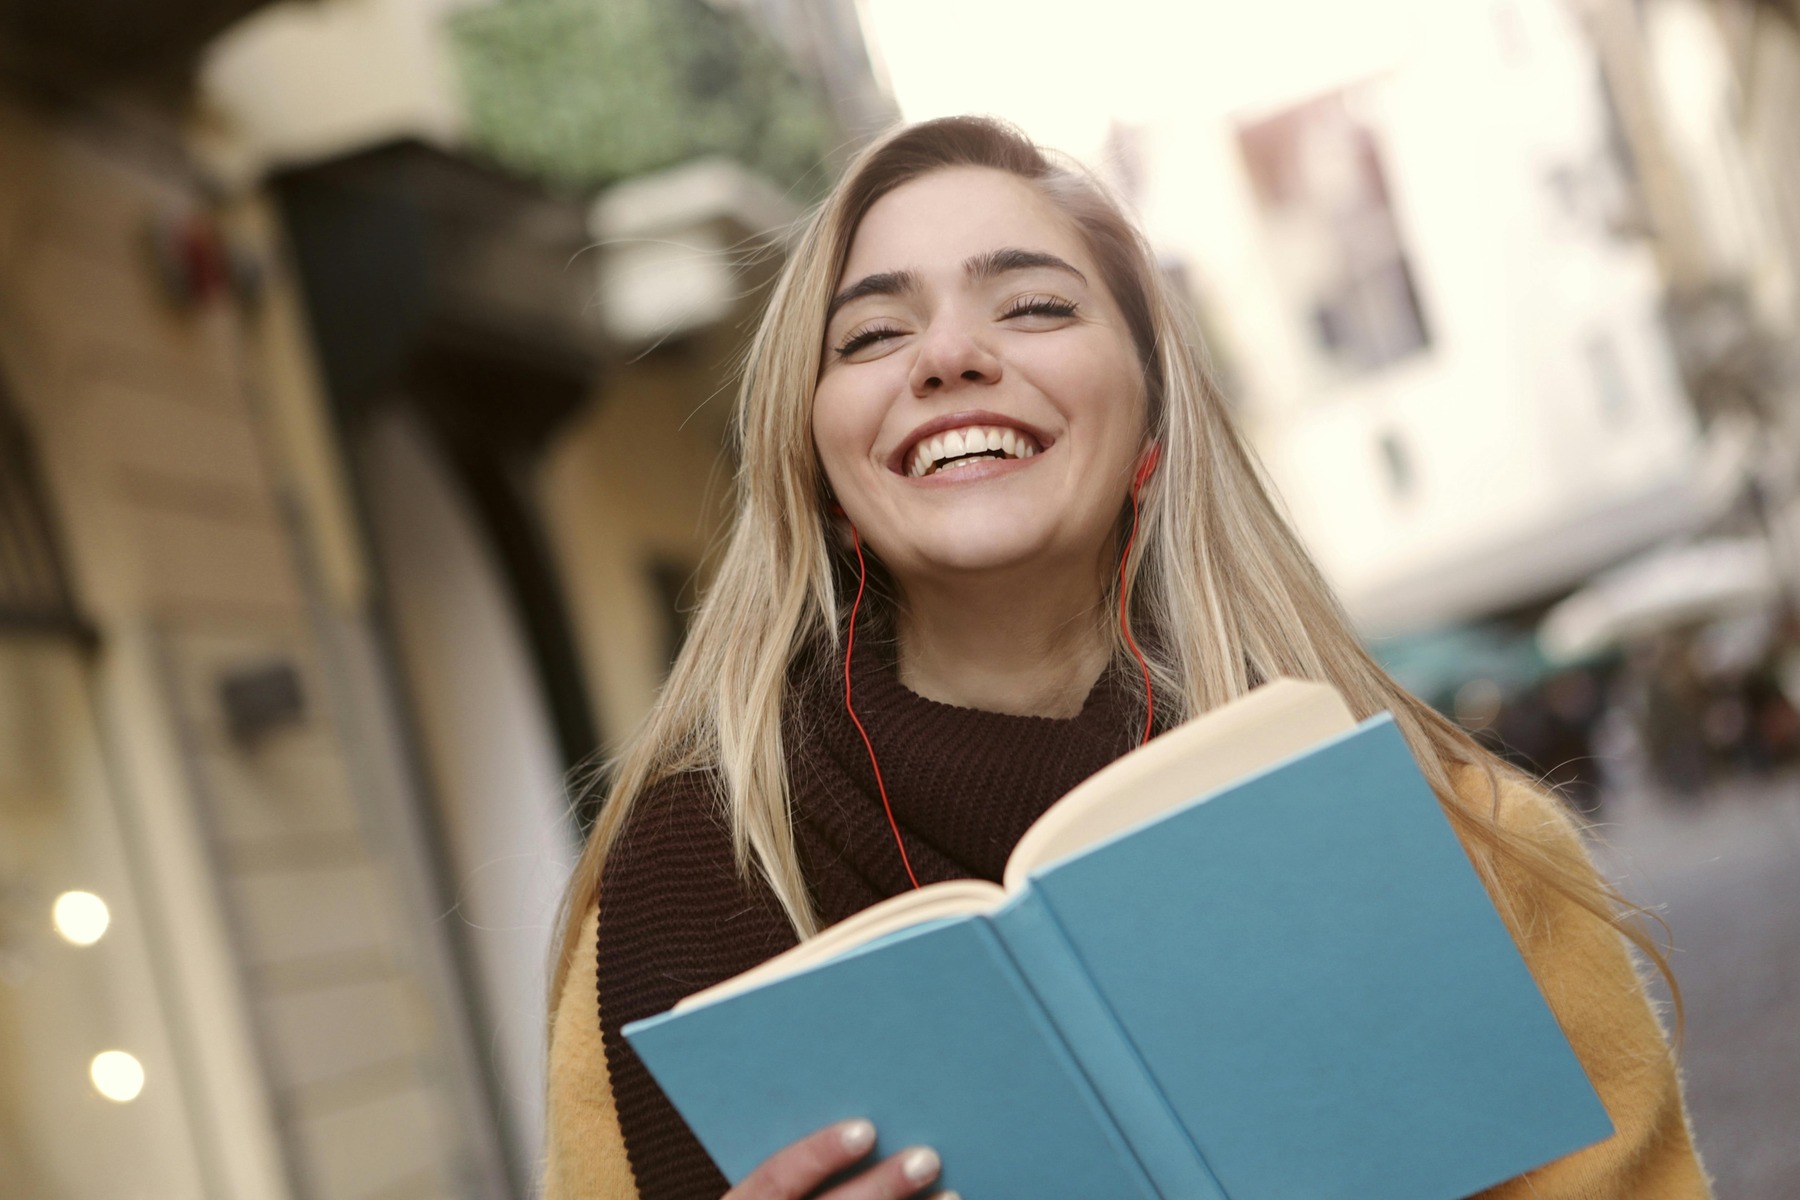 Woman smiling and wearing earphones while holding a book